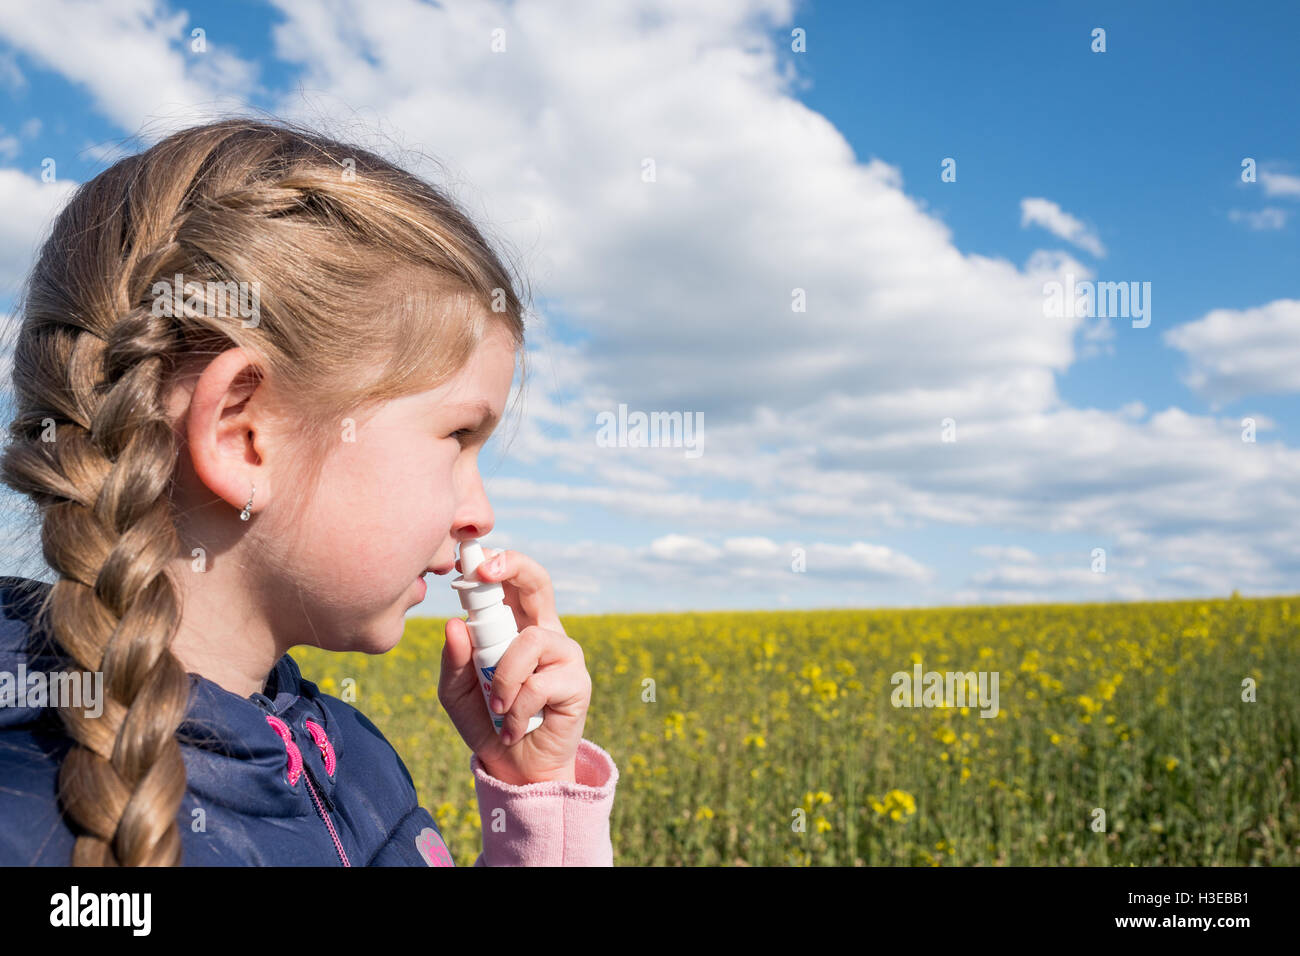 Beautiful young girl suffering from allergy using nasal spray Stock Photo